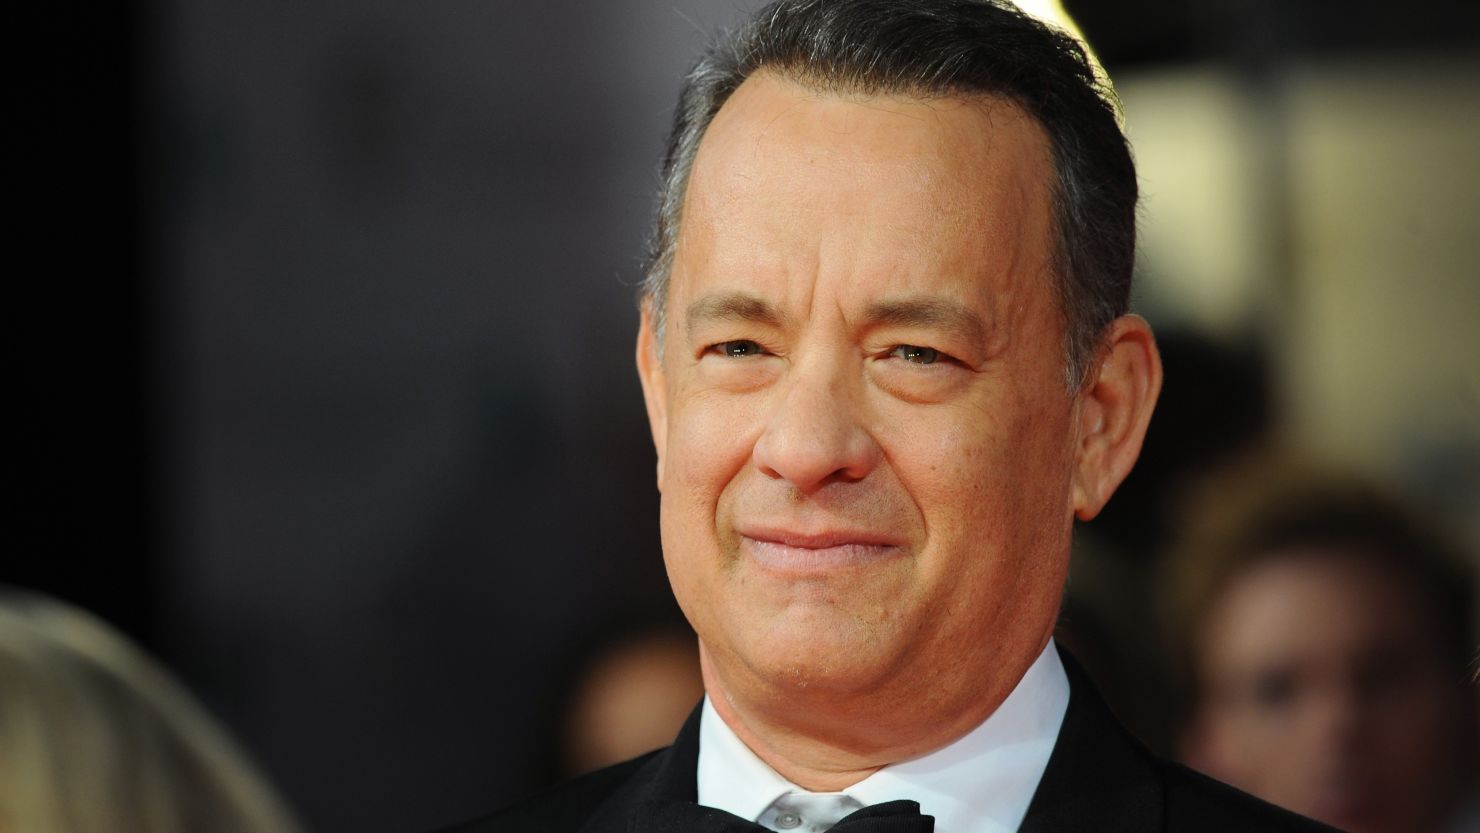 Actor Tom Hanks is just a really good guy.